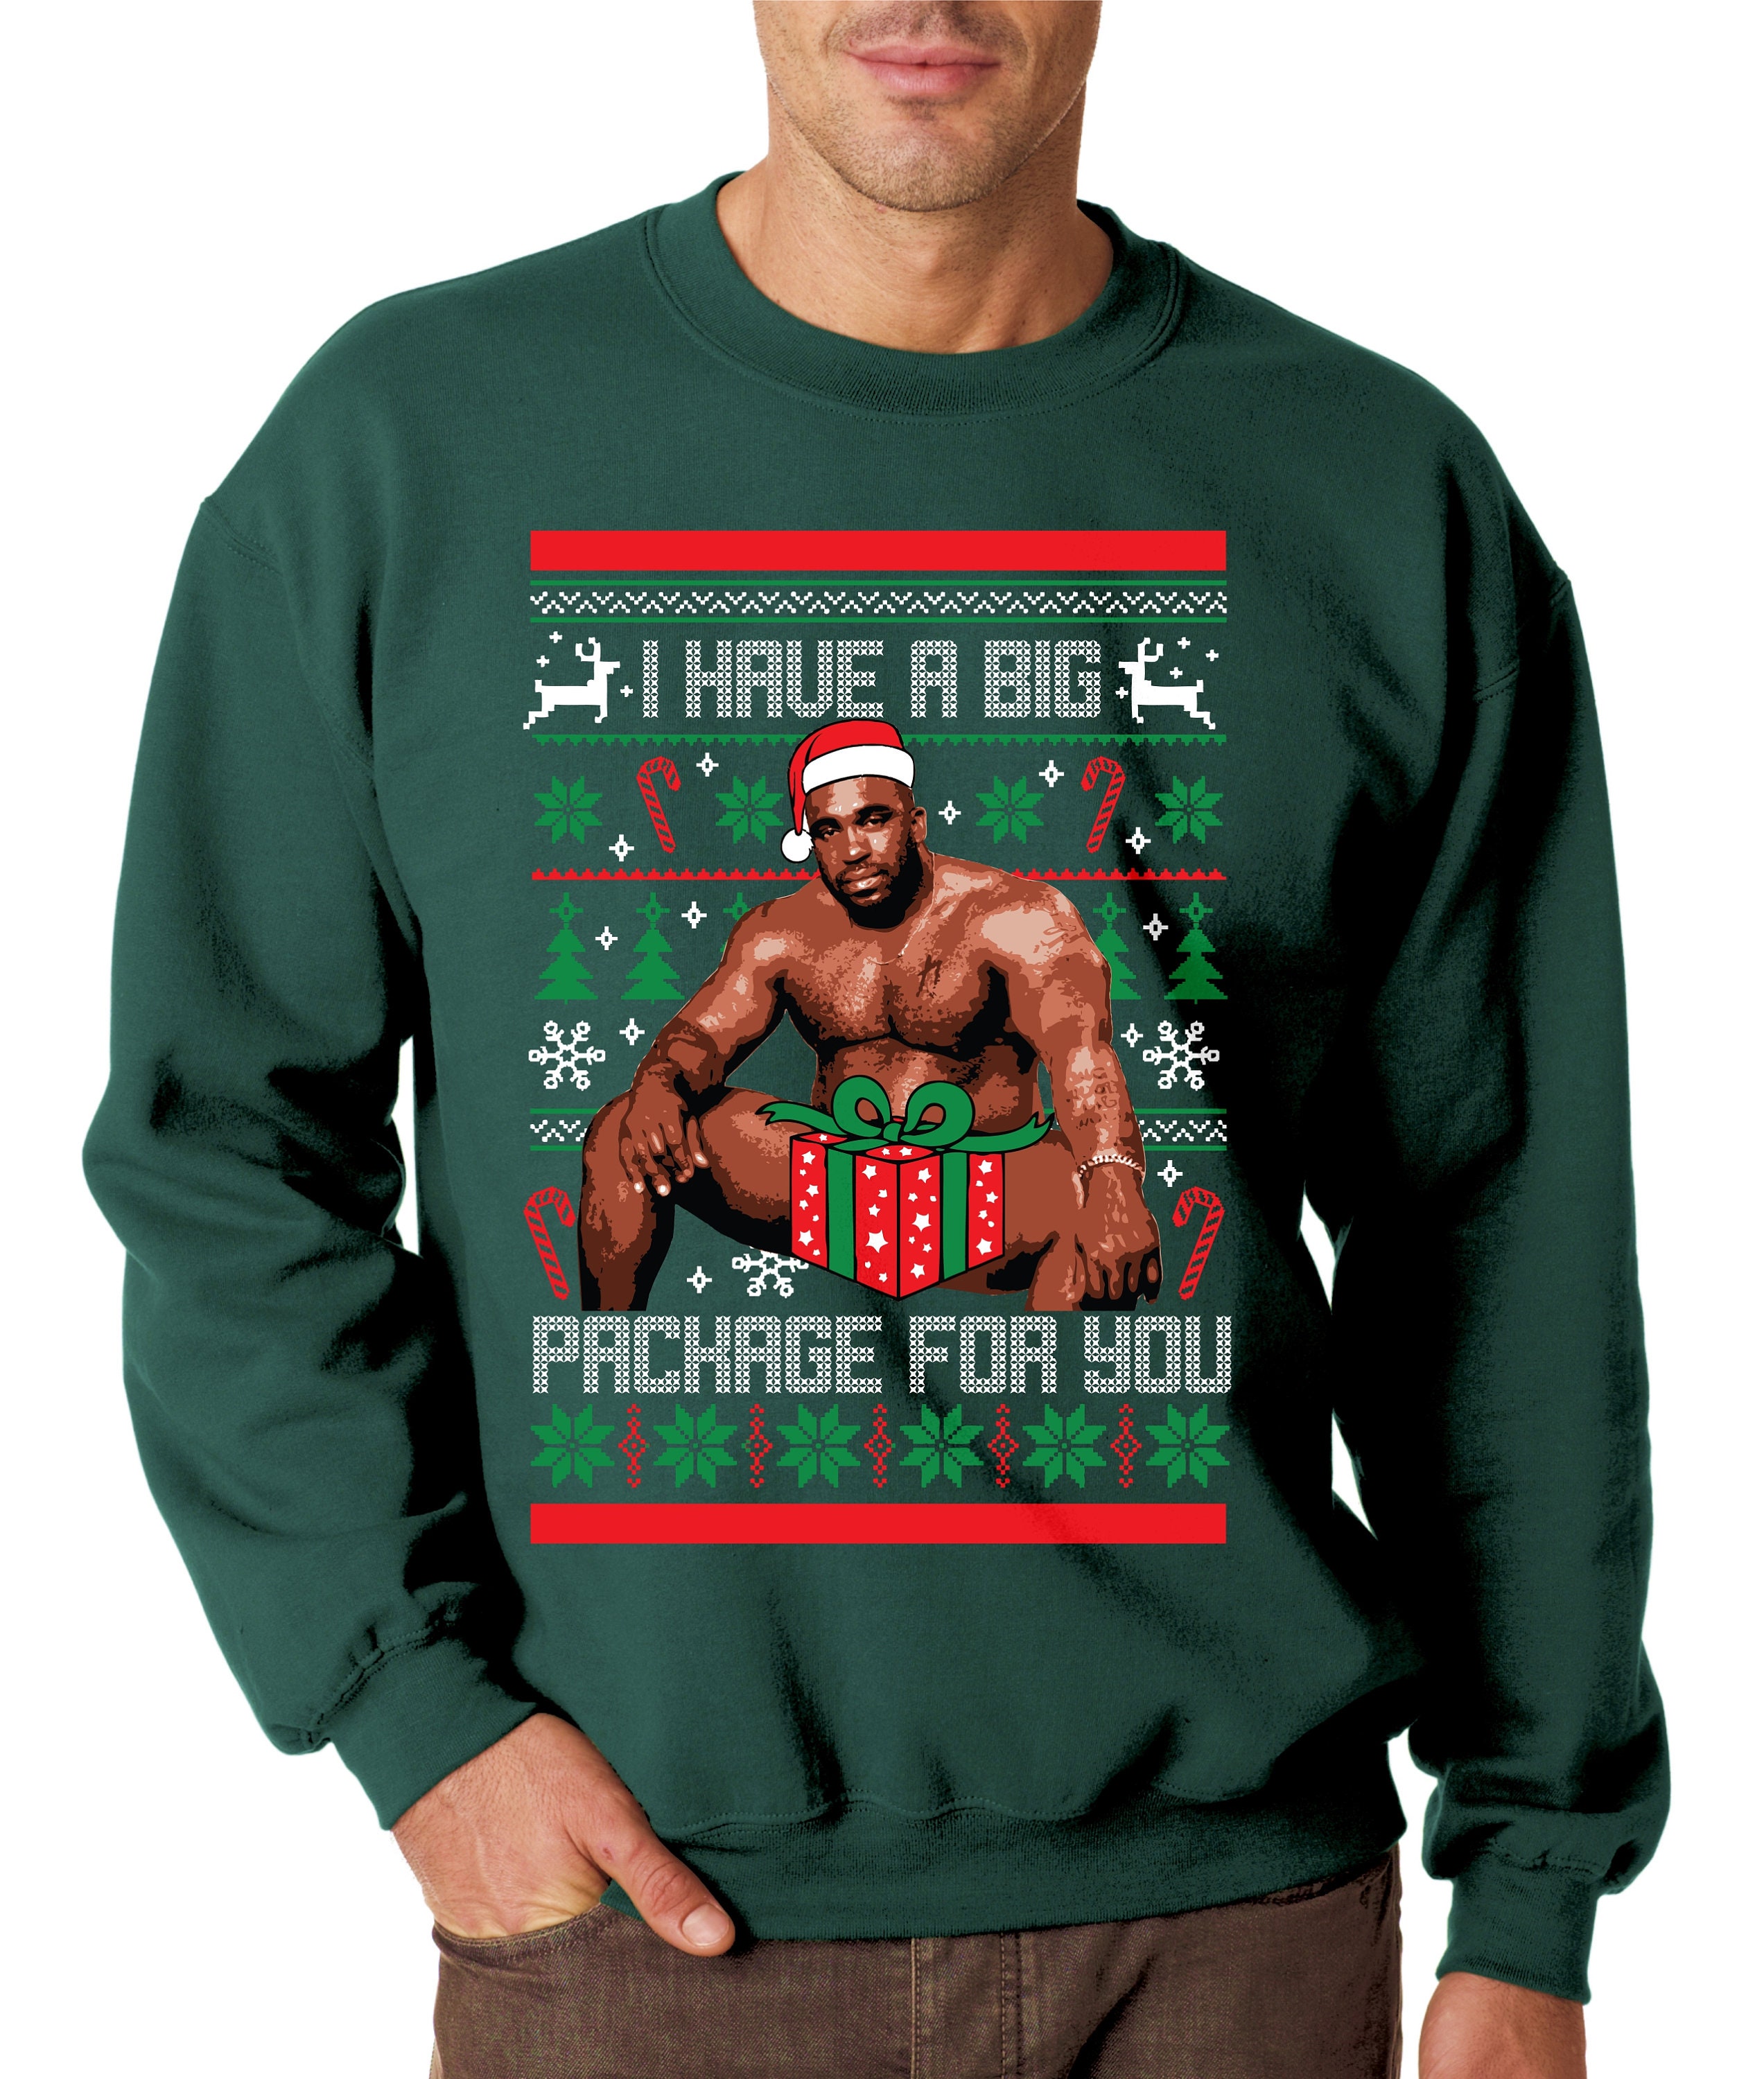 BARRY WOOD Sitting on a Bed - Meme Christmas Sweater - Christmas Jumper ...